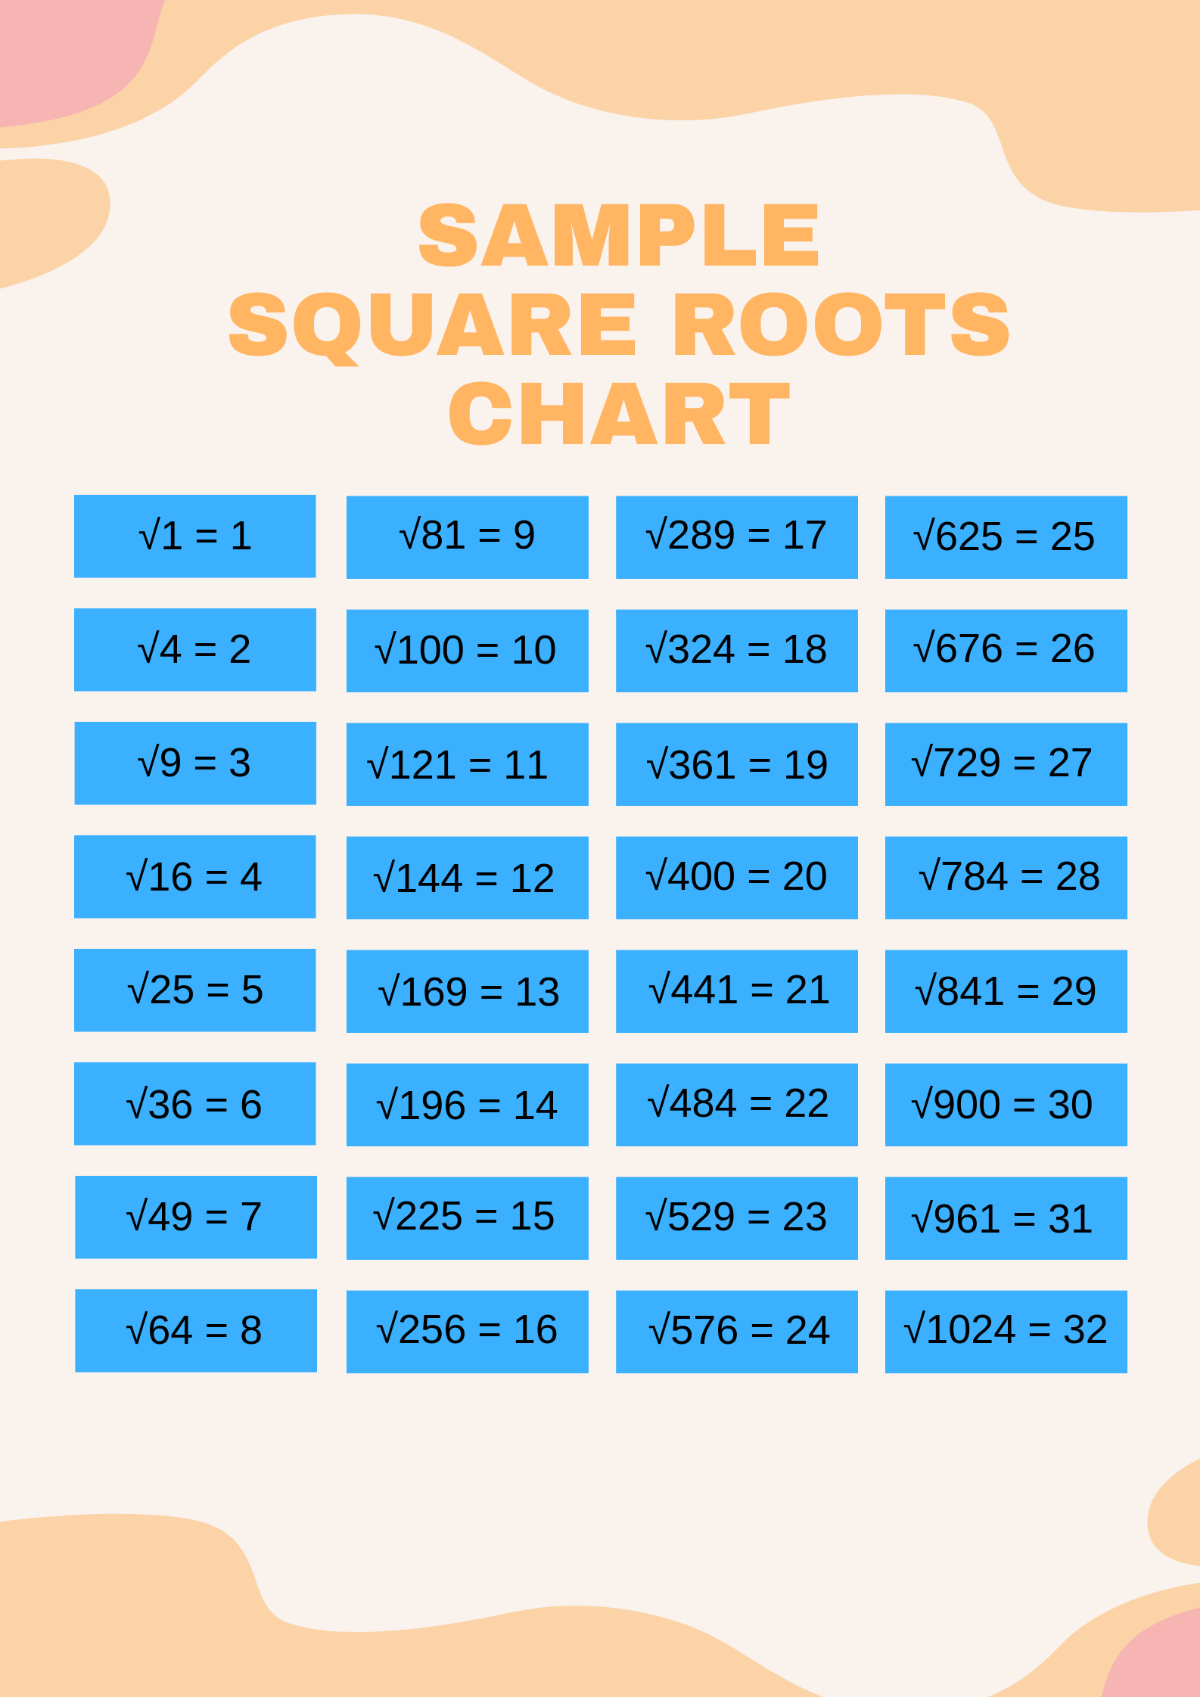 Sample Square Roots Chart Template